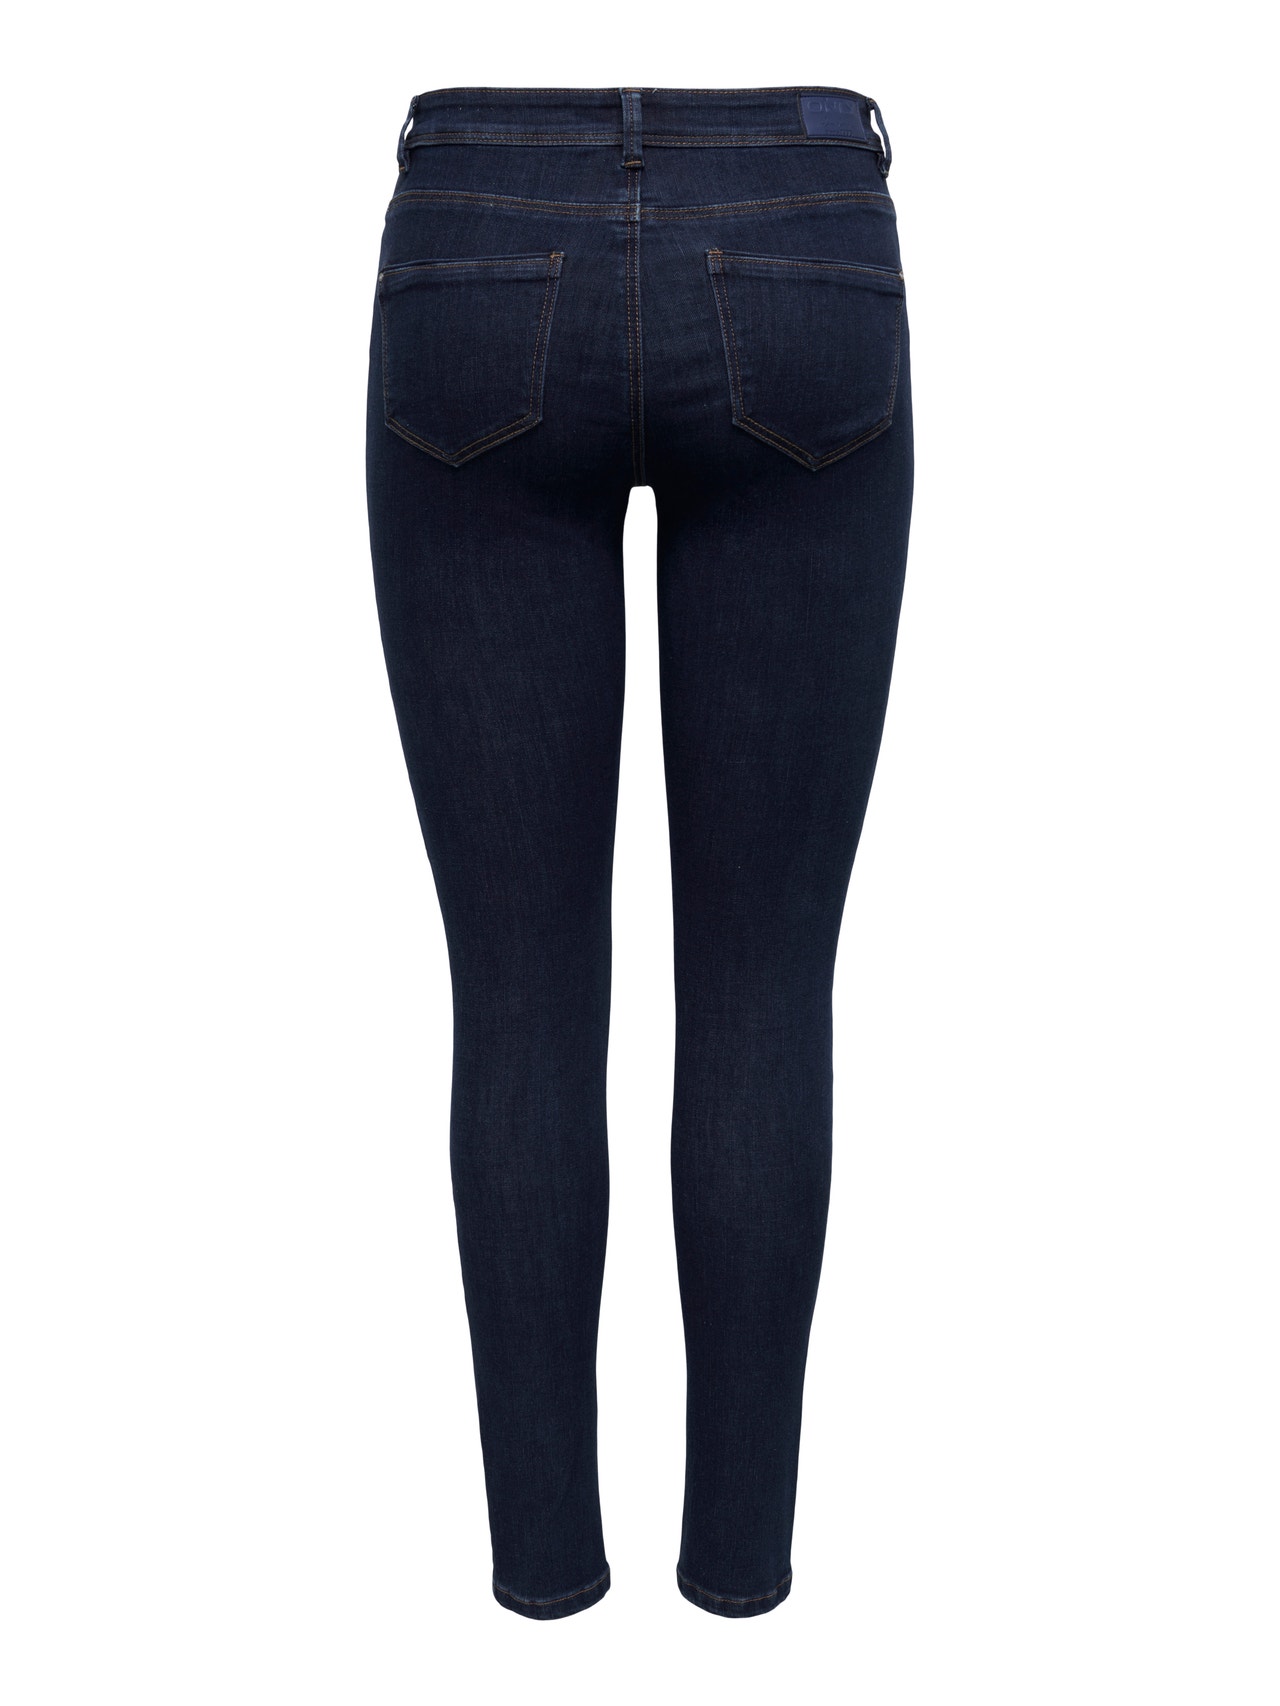 ONLY Jeans Skinny Fit Taille moyenne -Dark Blue Denim - 15272480